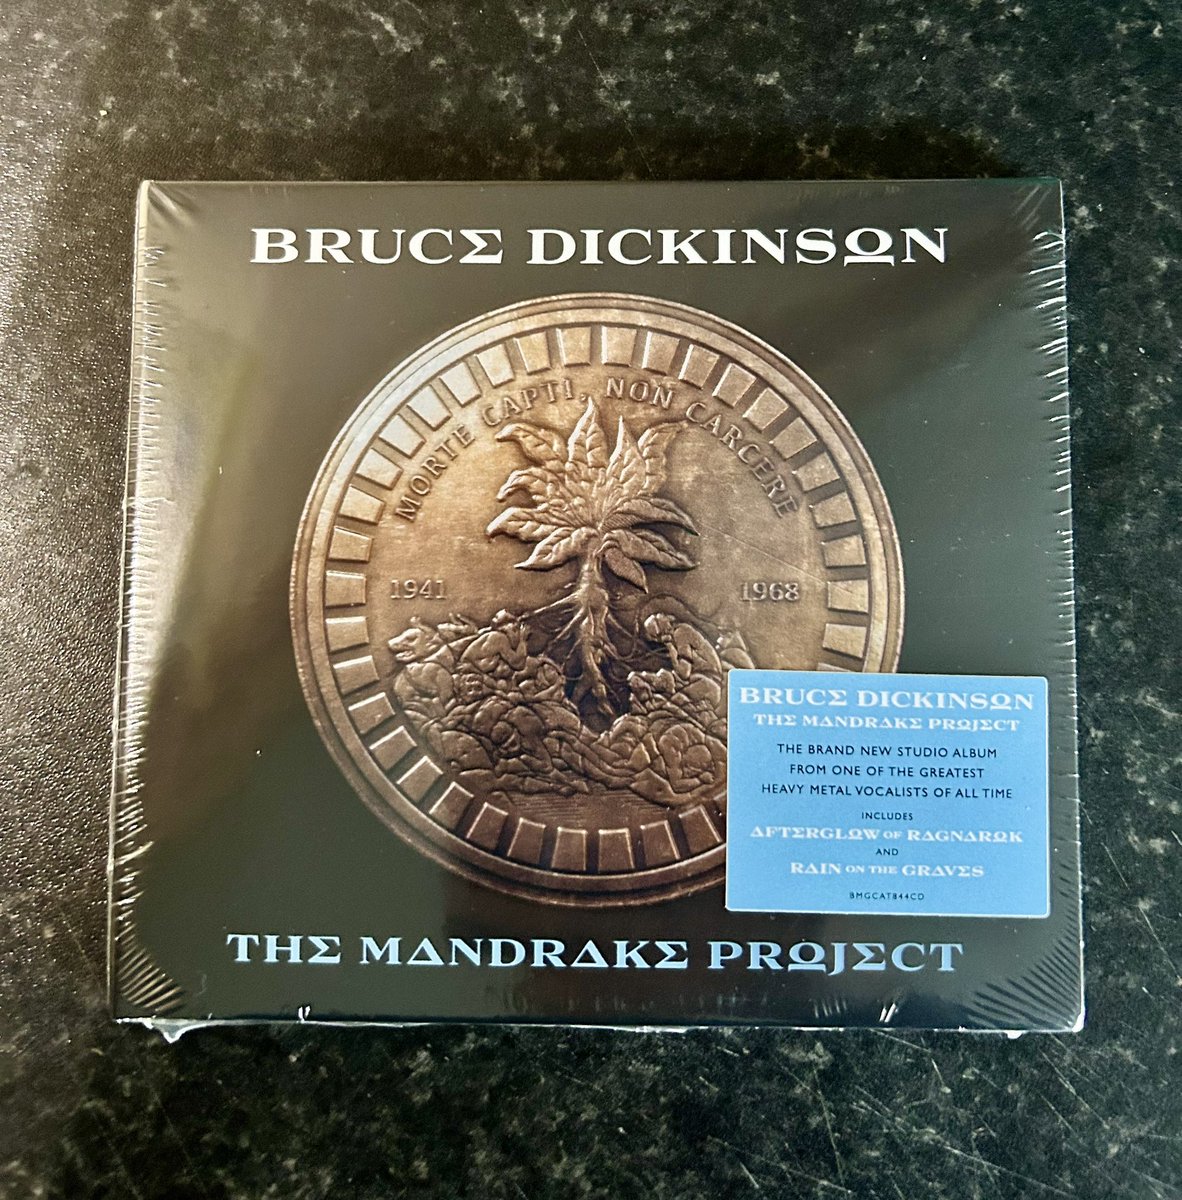 Bruce has arrived. @IronMaiden #themandrakeproject #brucedickinson